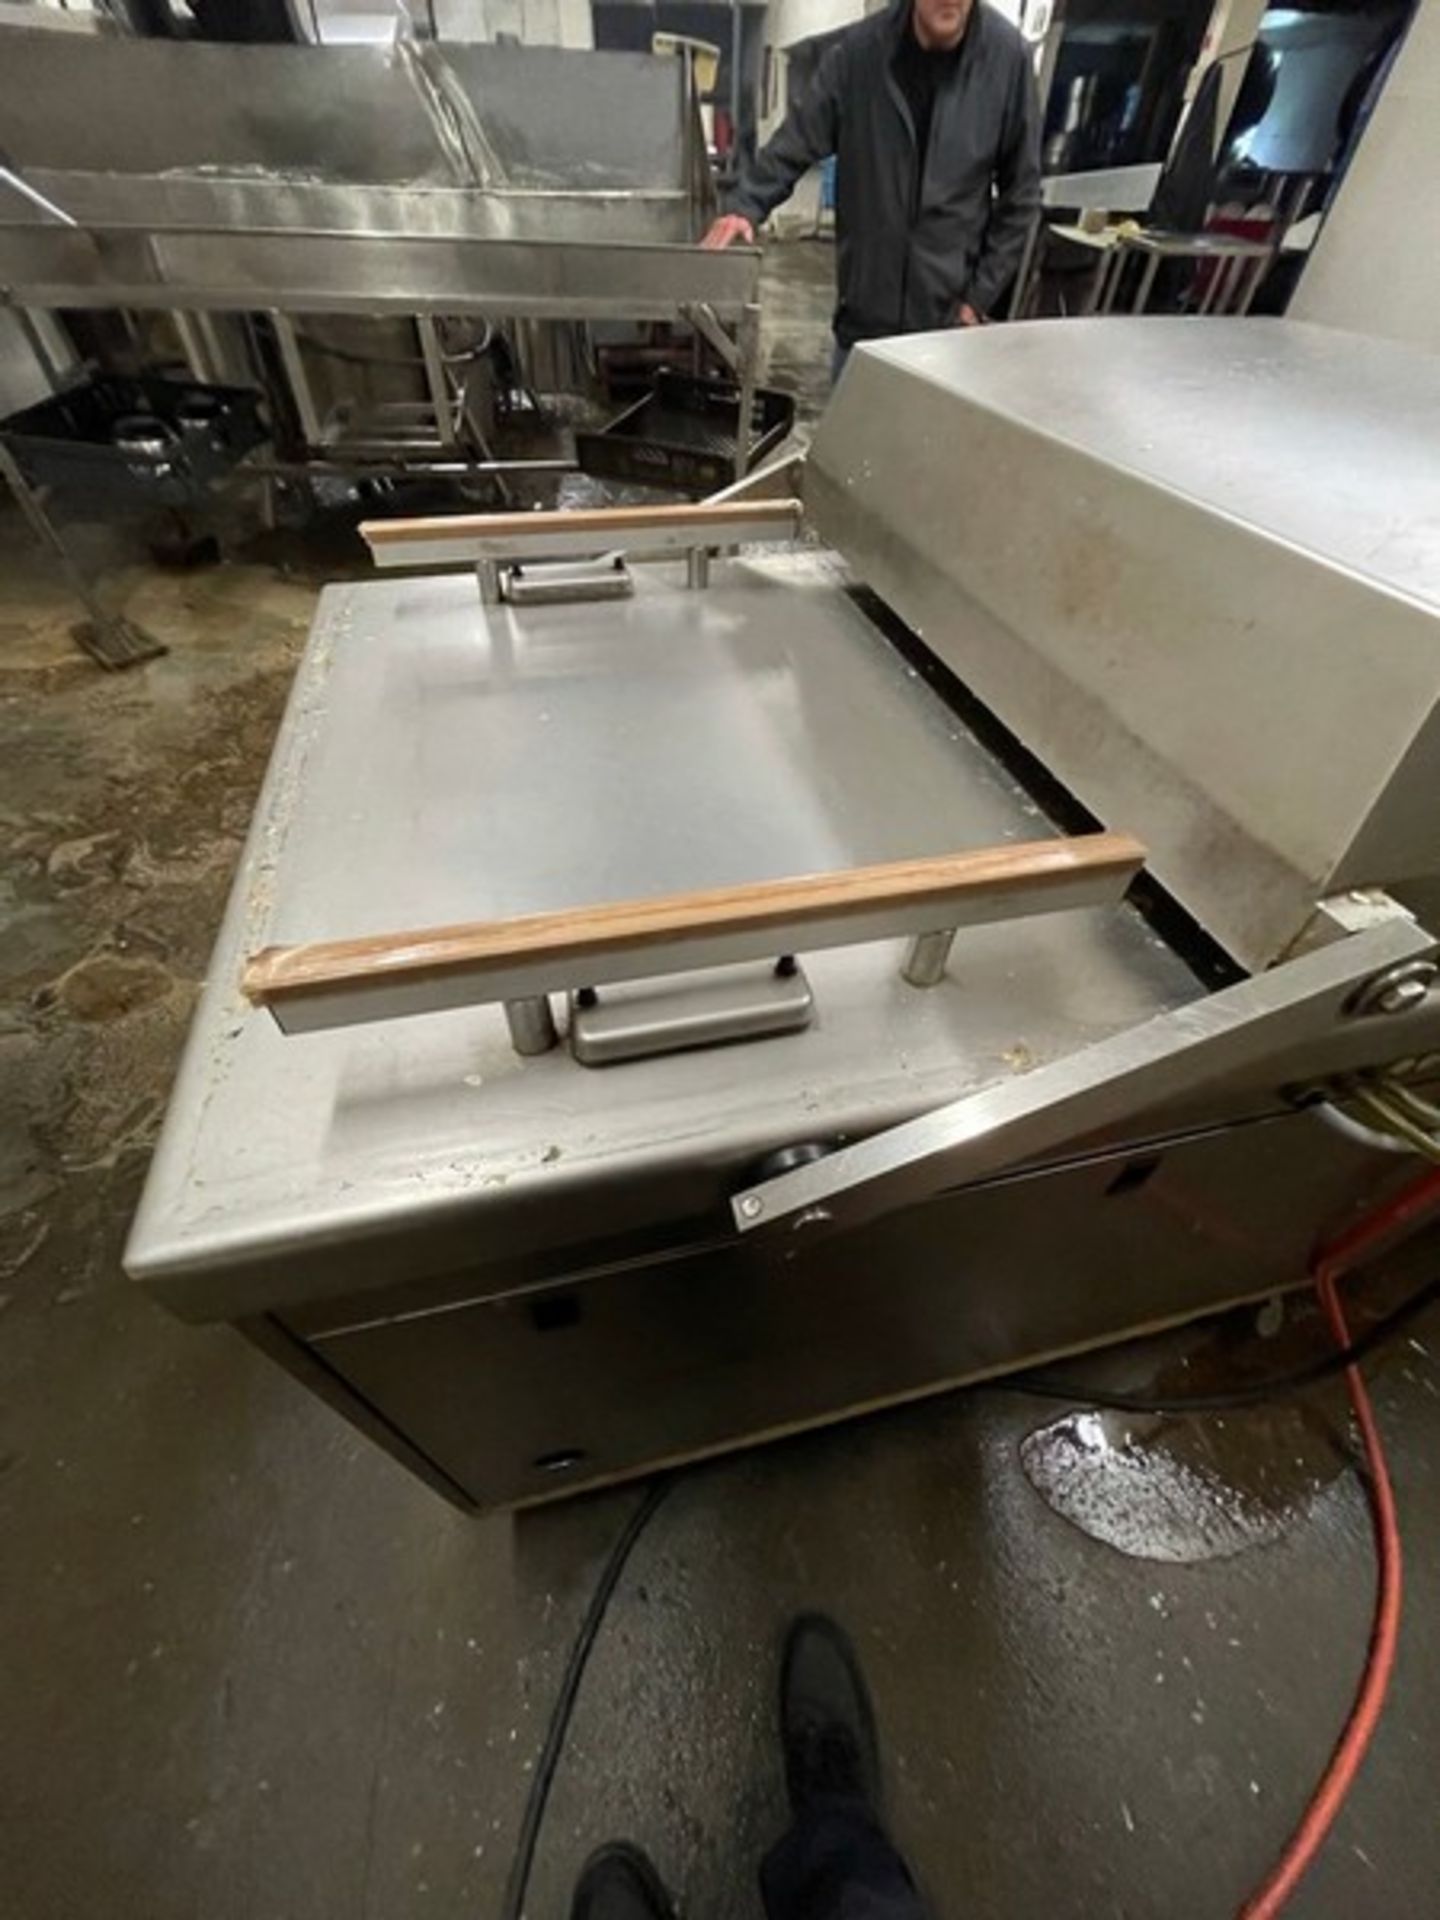 MULTIVAC CHAMBER SEALER, MODEL C450,S/N 105643, CHAMBER APPROX. 26" X 22", ONBOARD VACUUM PUMP, - Image 13 of 23